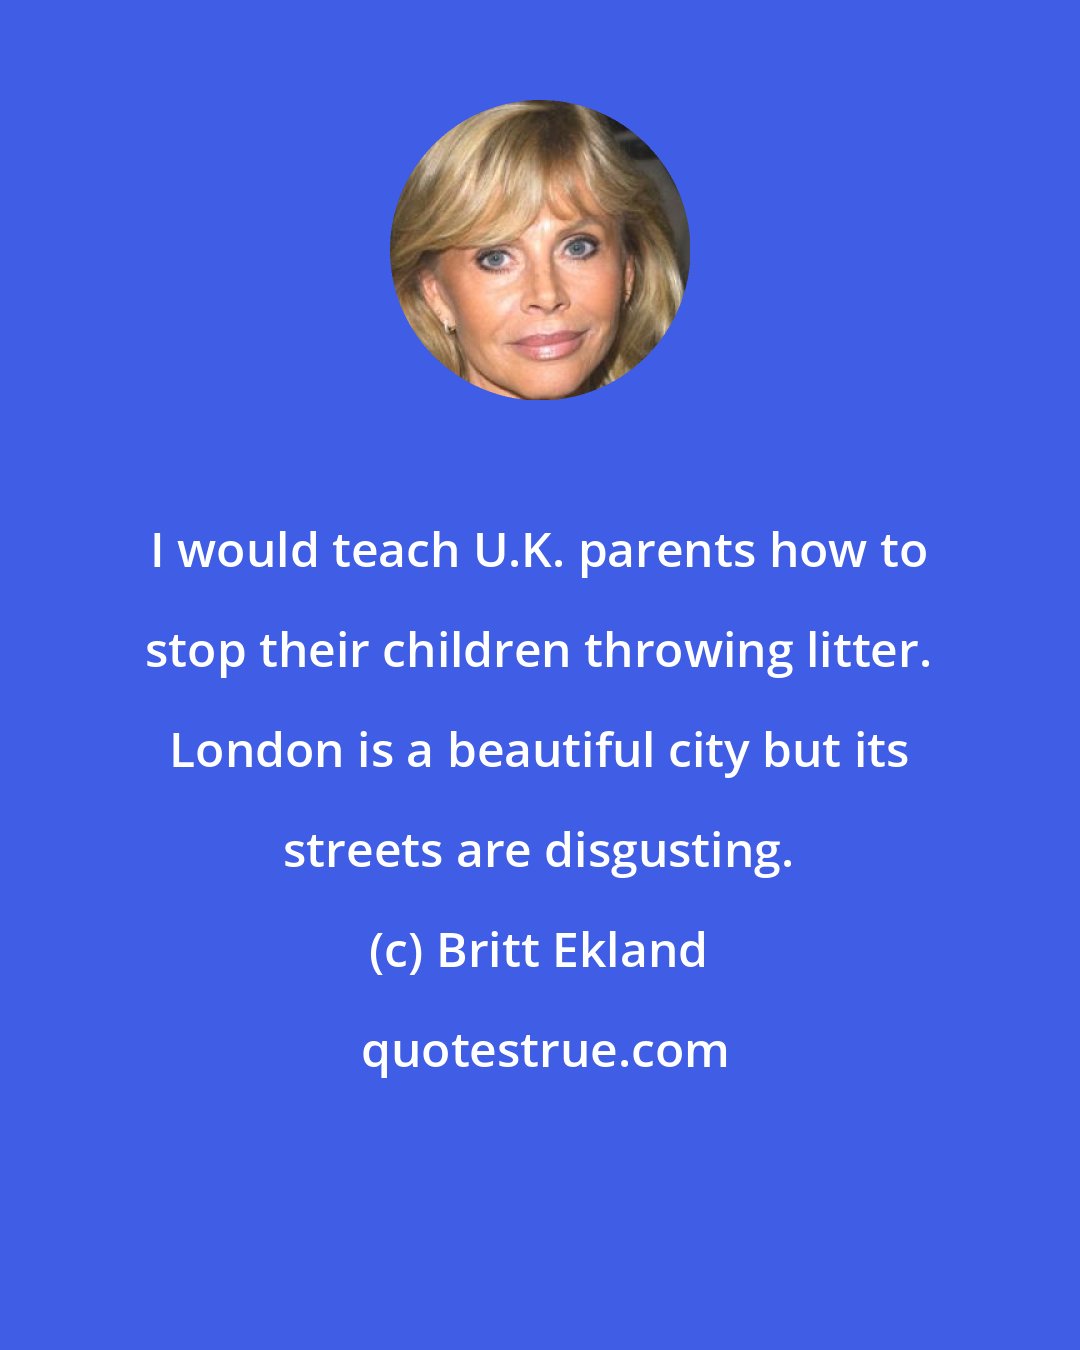 Britt Ekland: I would teach U.K. parents how to stop their children throwing litter. London is a beautiful city but its streets are disgusting.